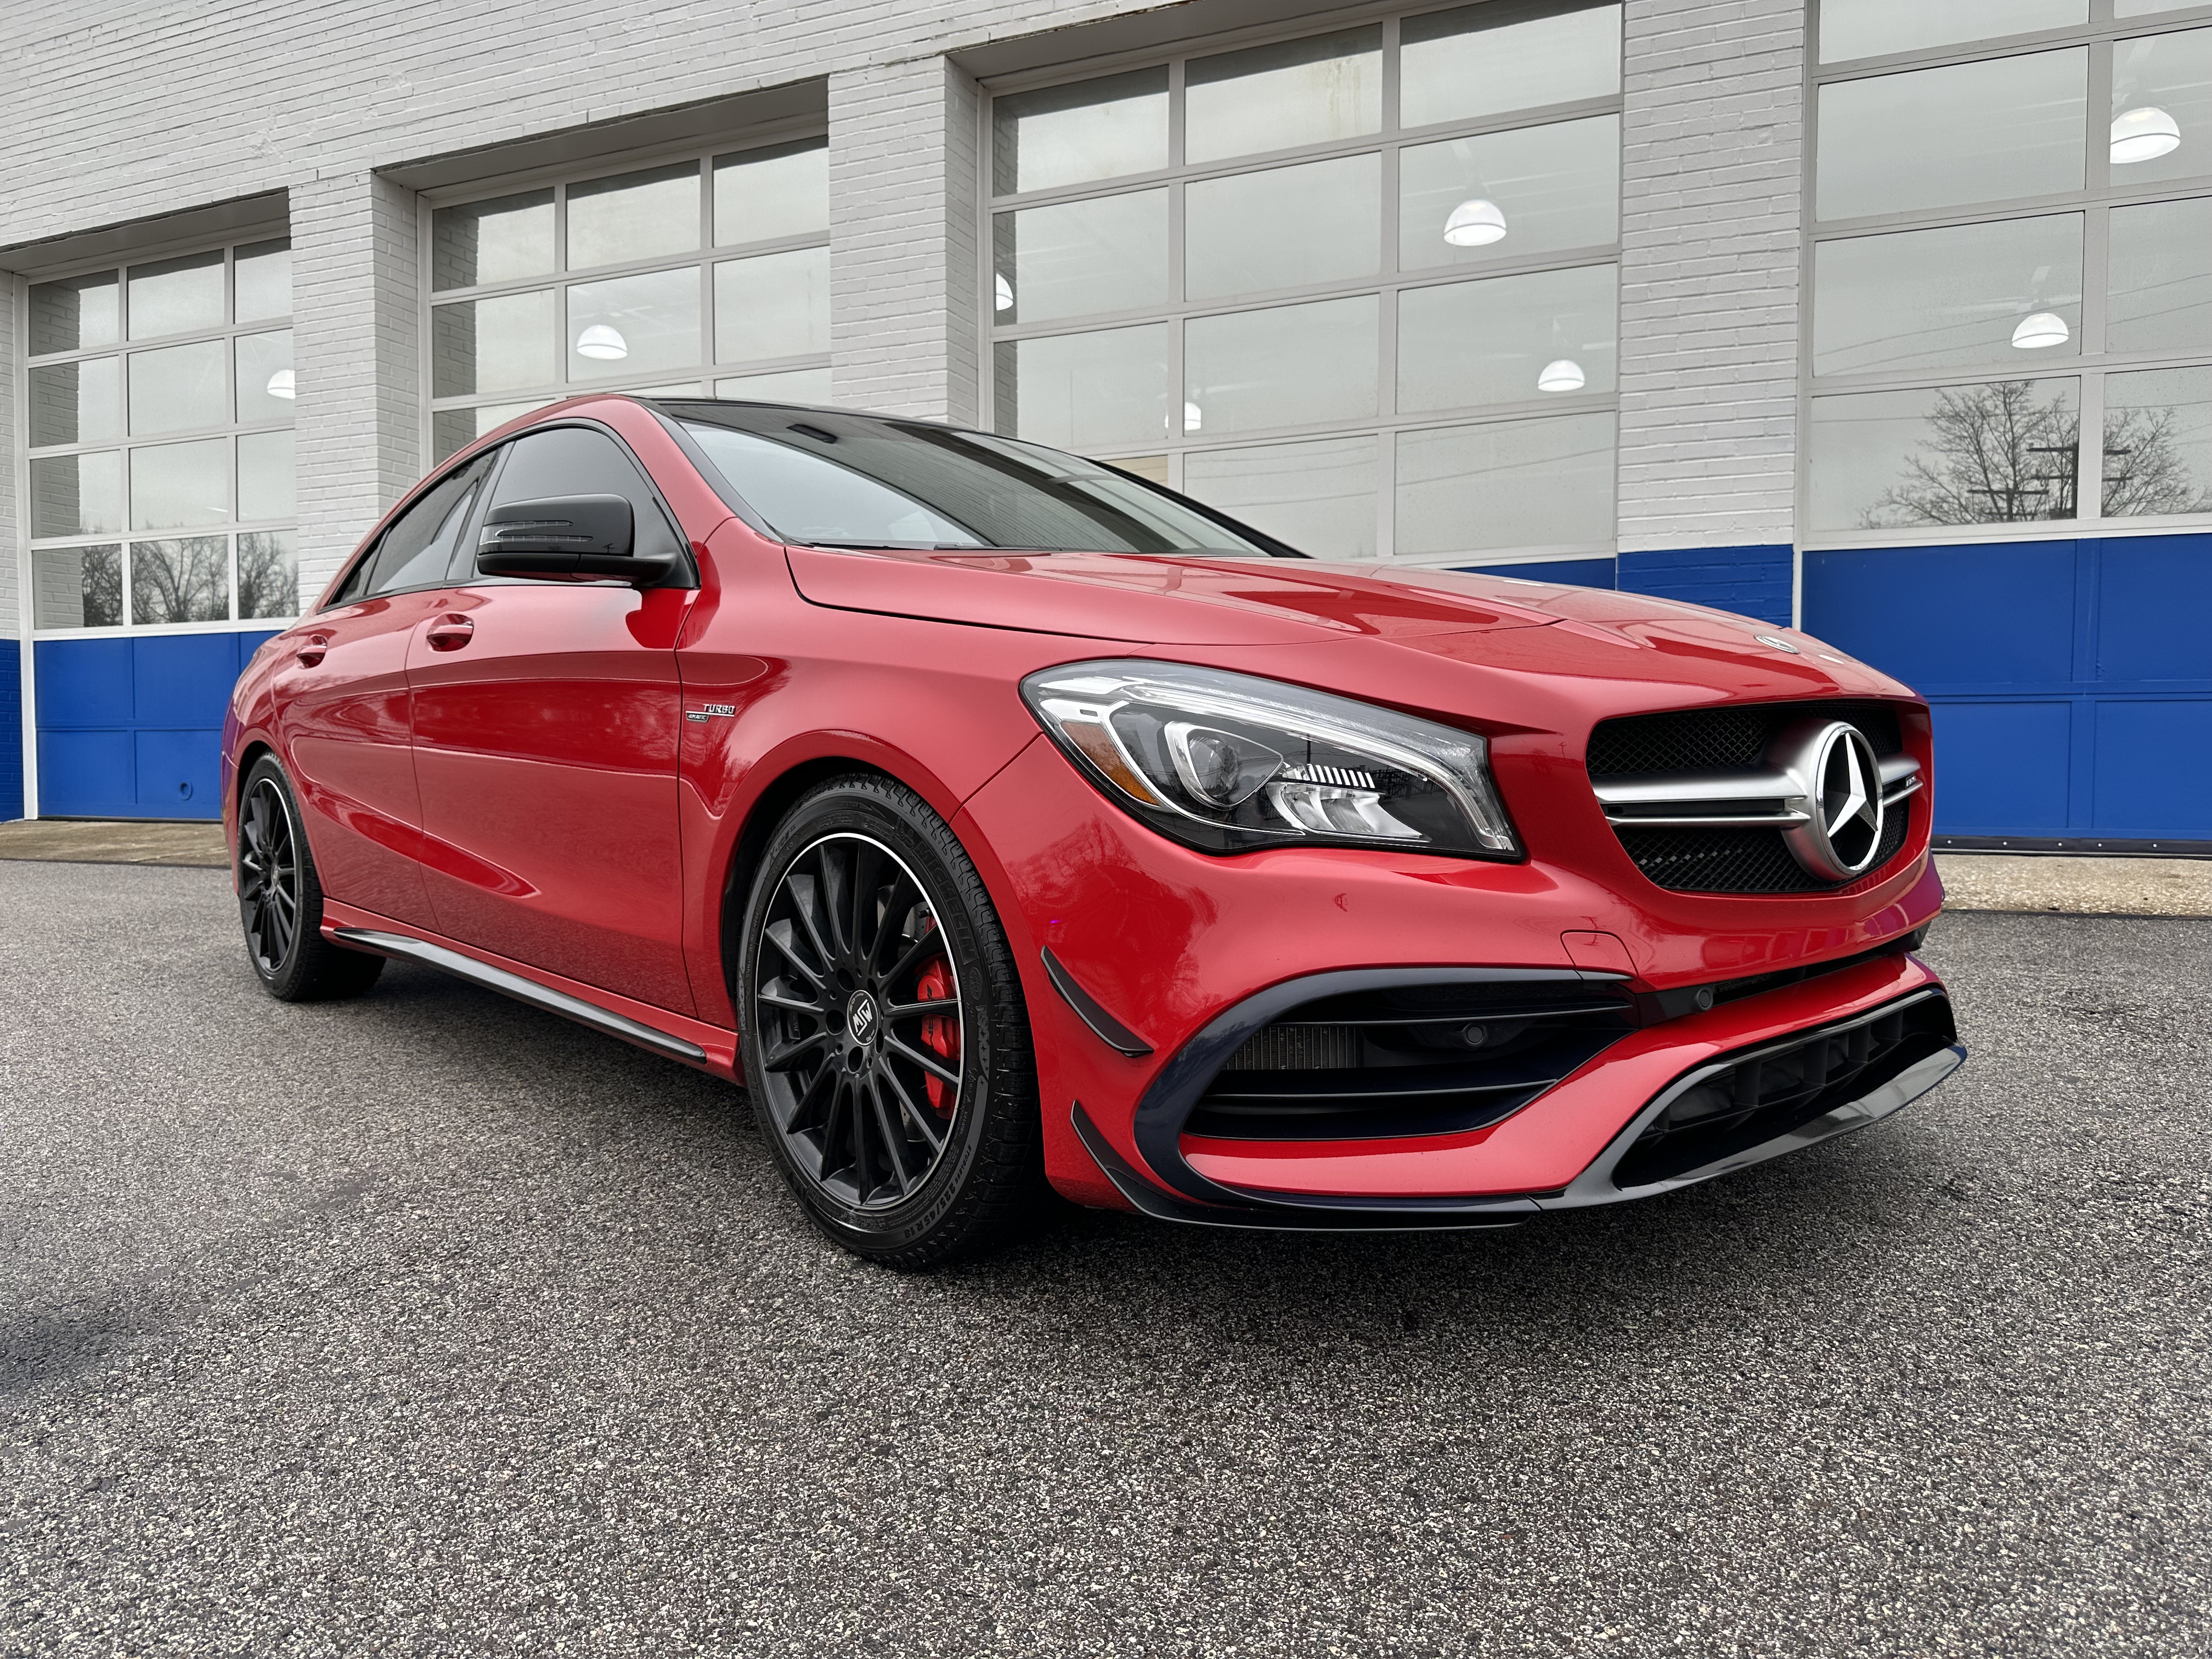 Used Mercedes-Benz CLA 45 AMG for Sale Right Now - Autotrader